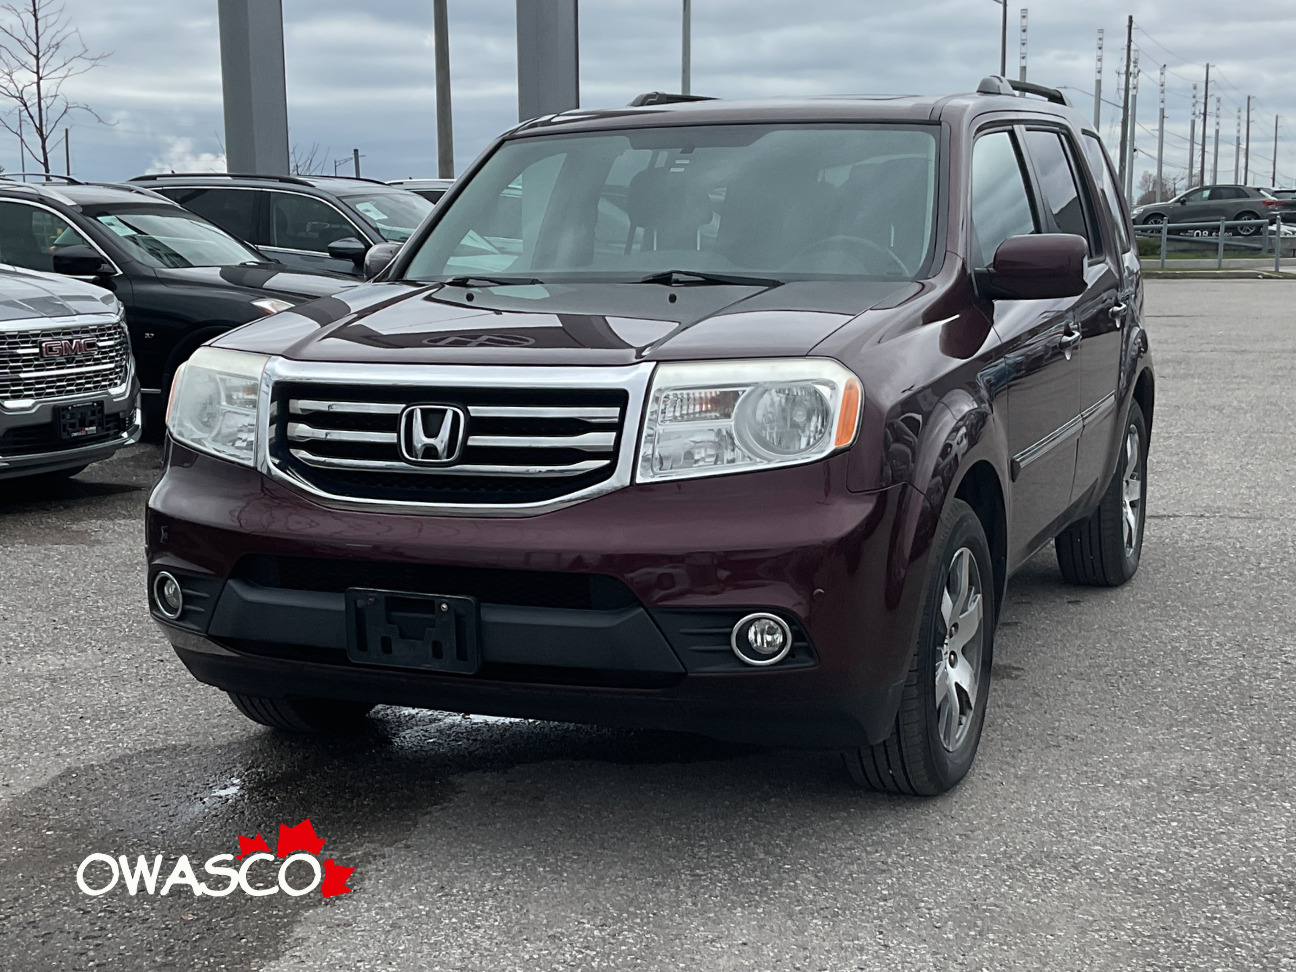 2014 Honda Pilot 3.5L Touring! Safety Included!